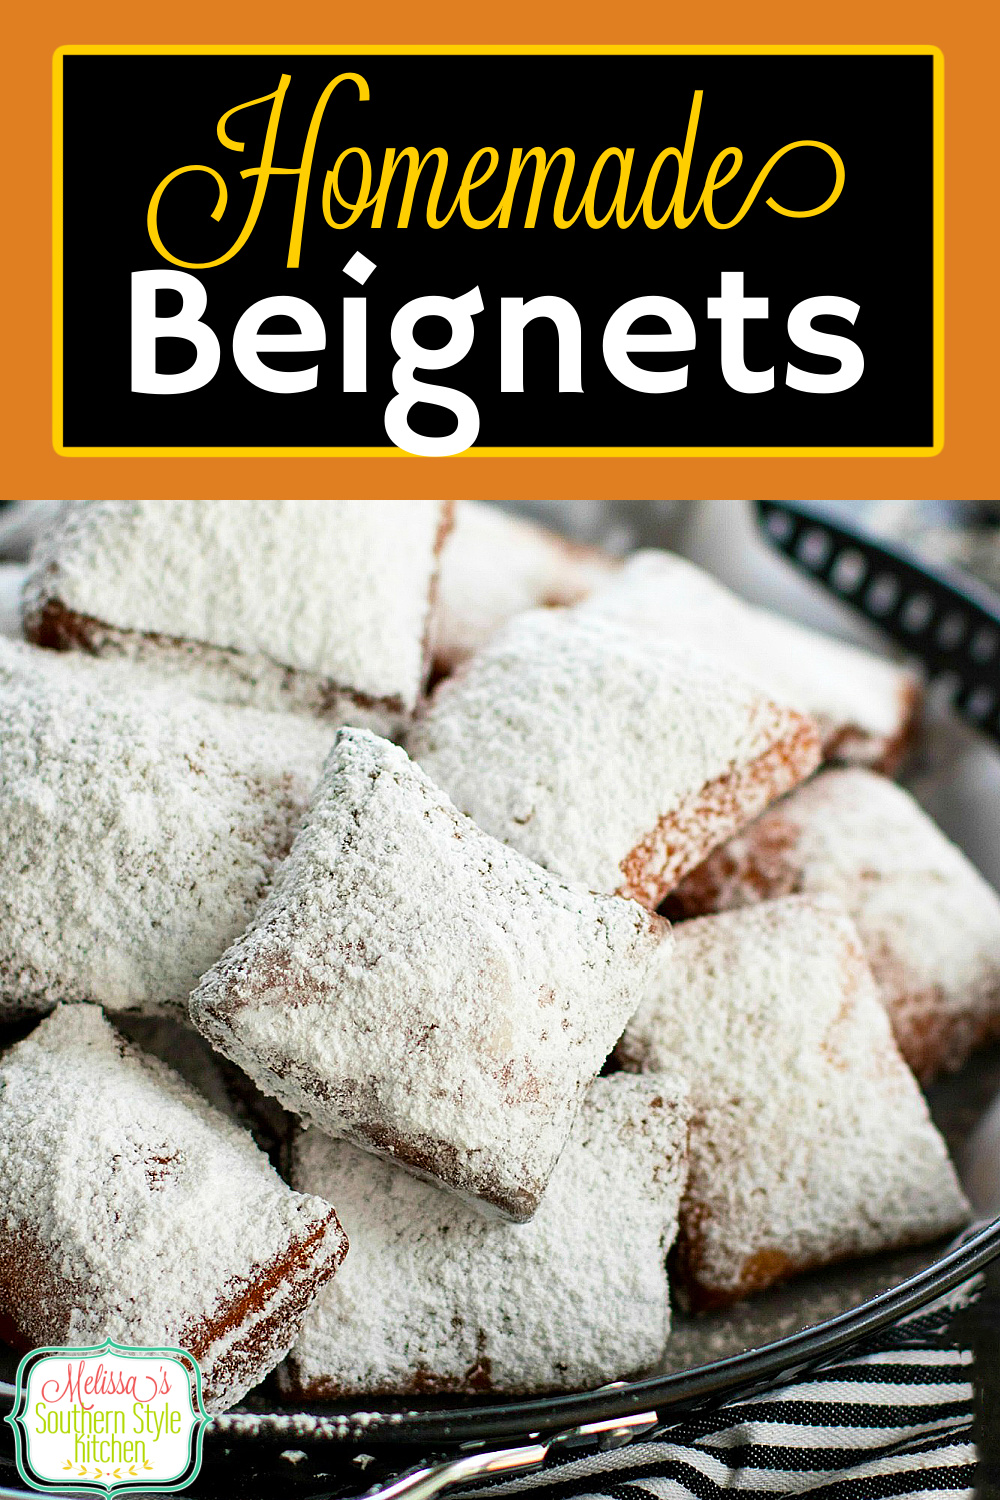 These fluffy NOLA style Beignets are a treat any time of day #beignets #mardisgrasrecipes #NOLA #sweets #desserts #beignetsrecipe #bestbeignets #southernrecipes via @melissasssk